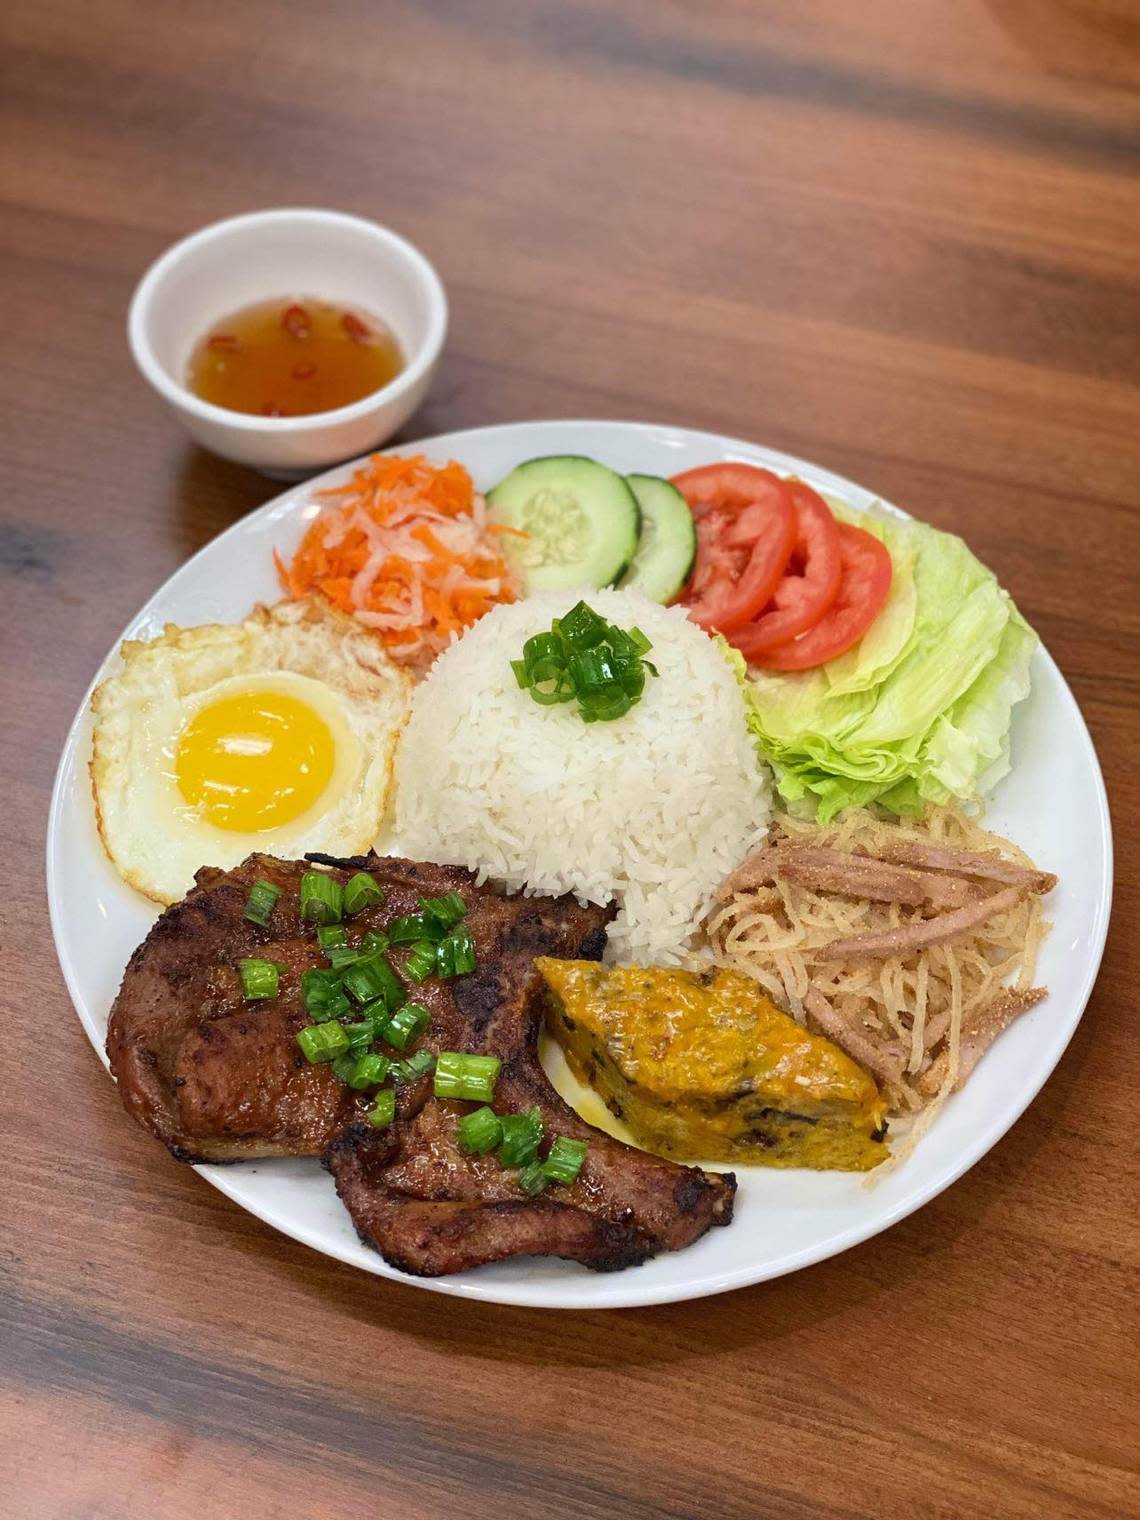 The Special Rice Platter ($15.49) is steamed rice with pork chop, shredded pork, Vietnamese steamed meatloaf and an egg served sunny-side up. Pho Nomenal